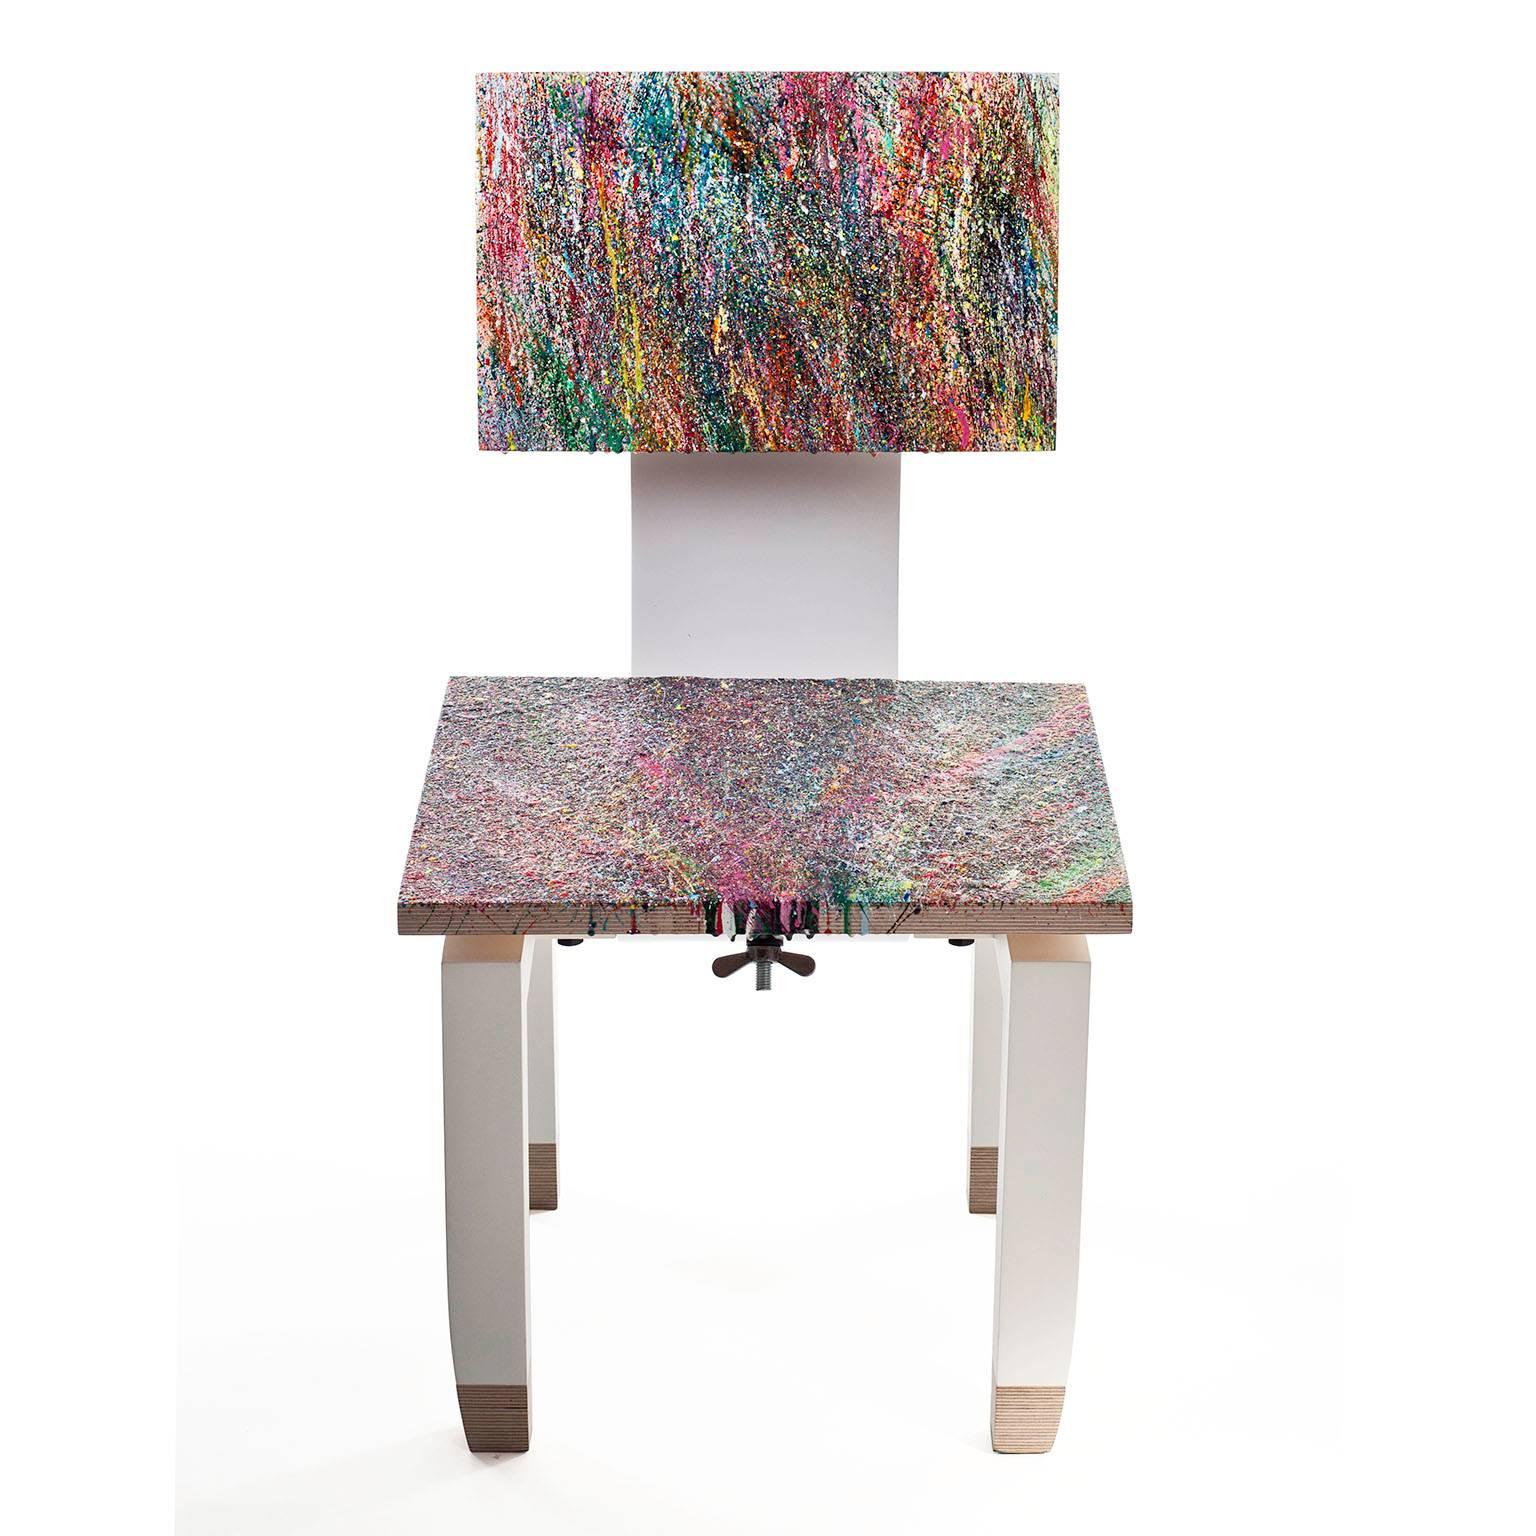 chair[dot]multi-ply "Color by Linnenbrink", 2015.

Art and design have always been neighbors. On McKibbin street they literally work right next door. When danielmoyer design's chair[dot]multi-ply stopped over at the studio of resin